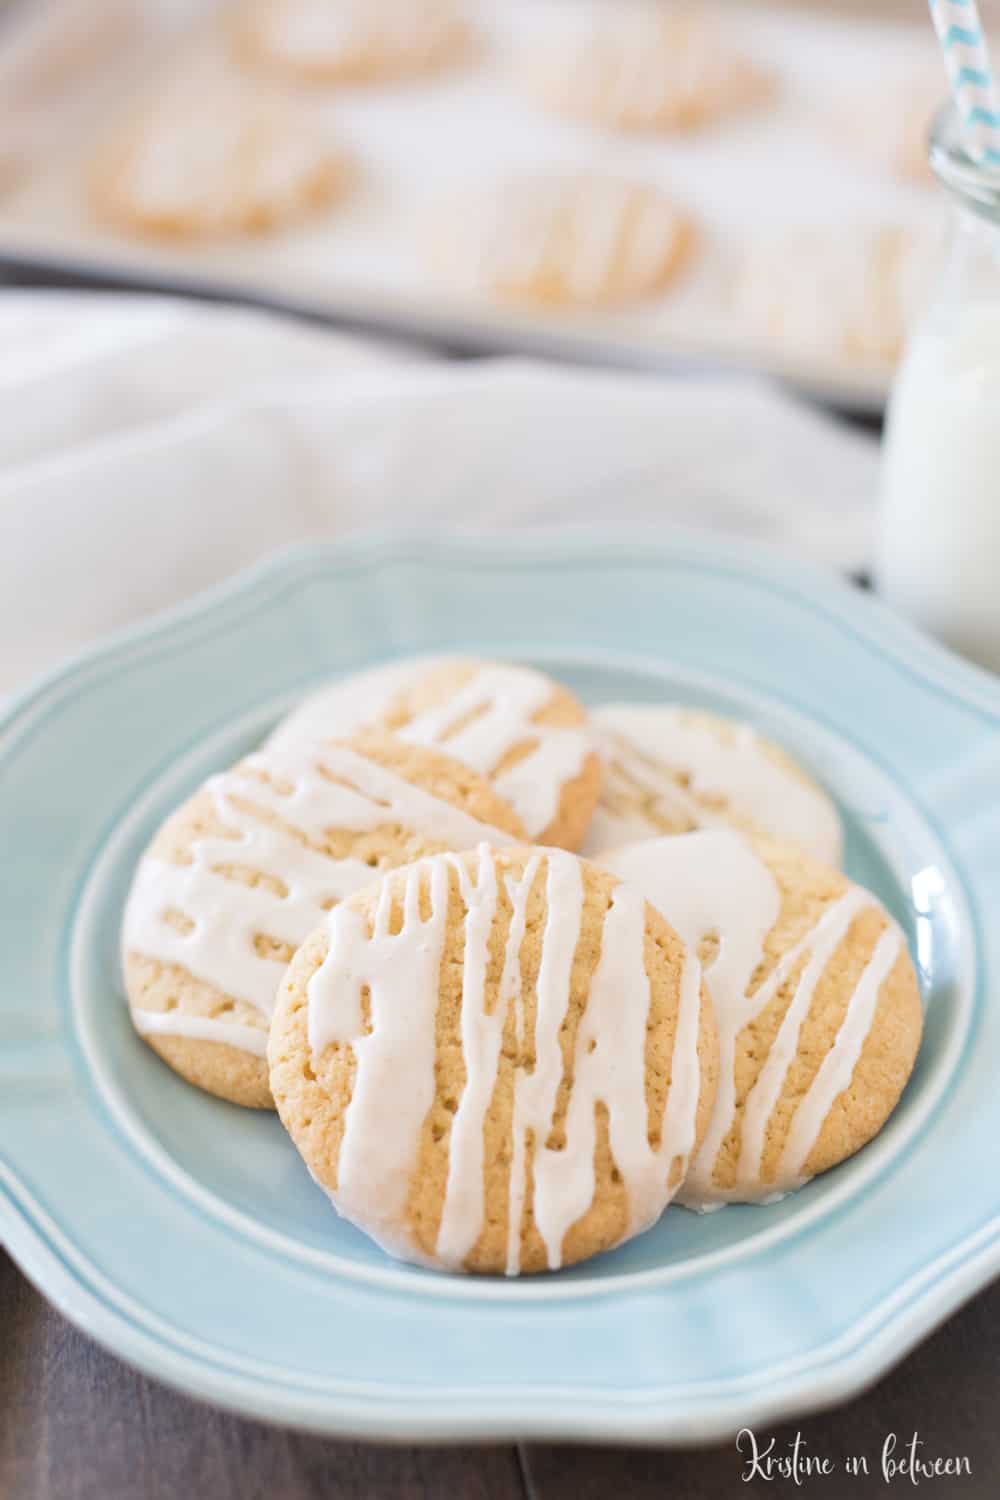 These thin and chewy maple sugar cookies are the perfect cookie with a sweet maple glaze!